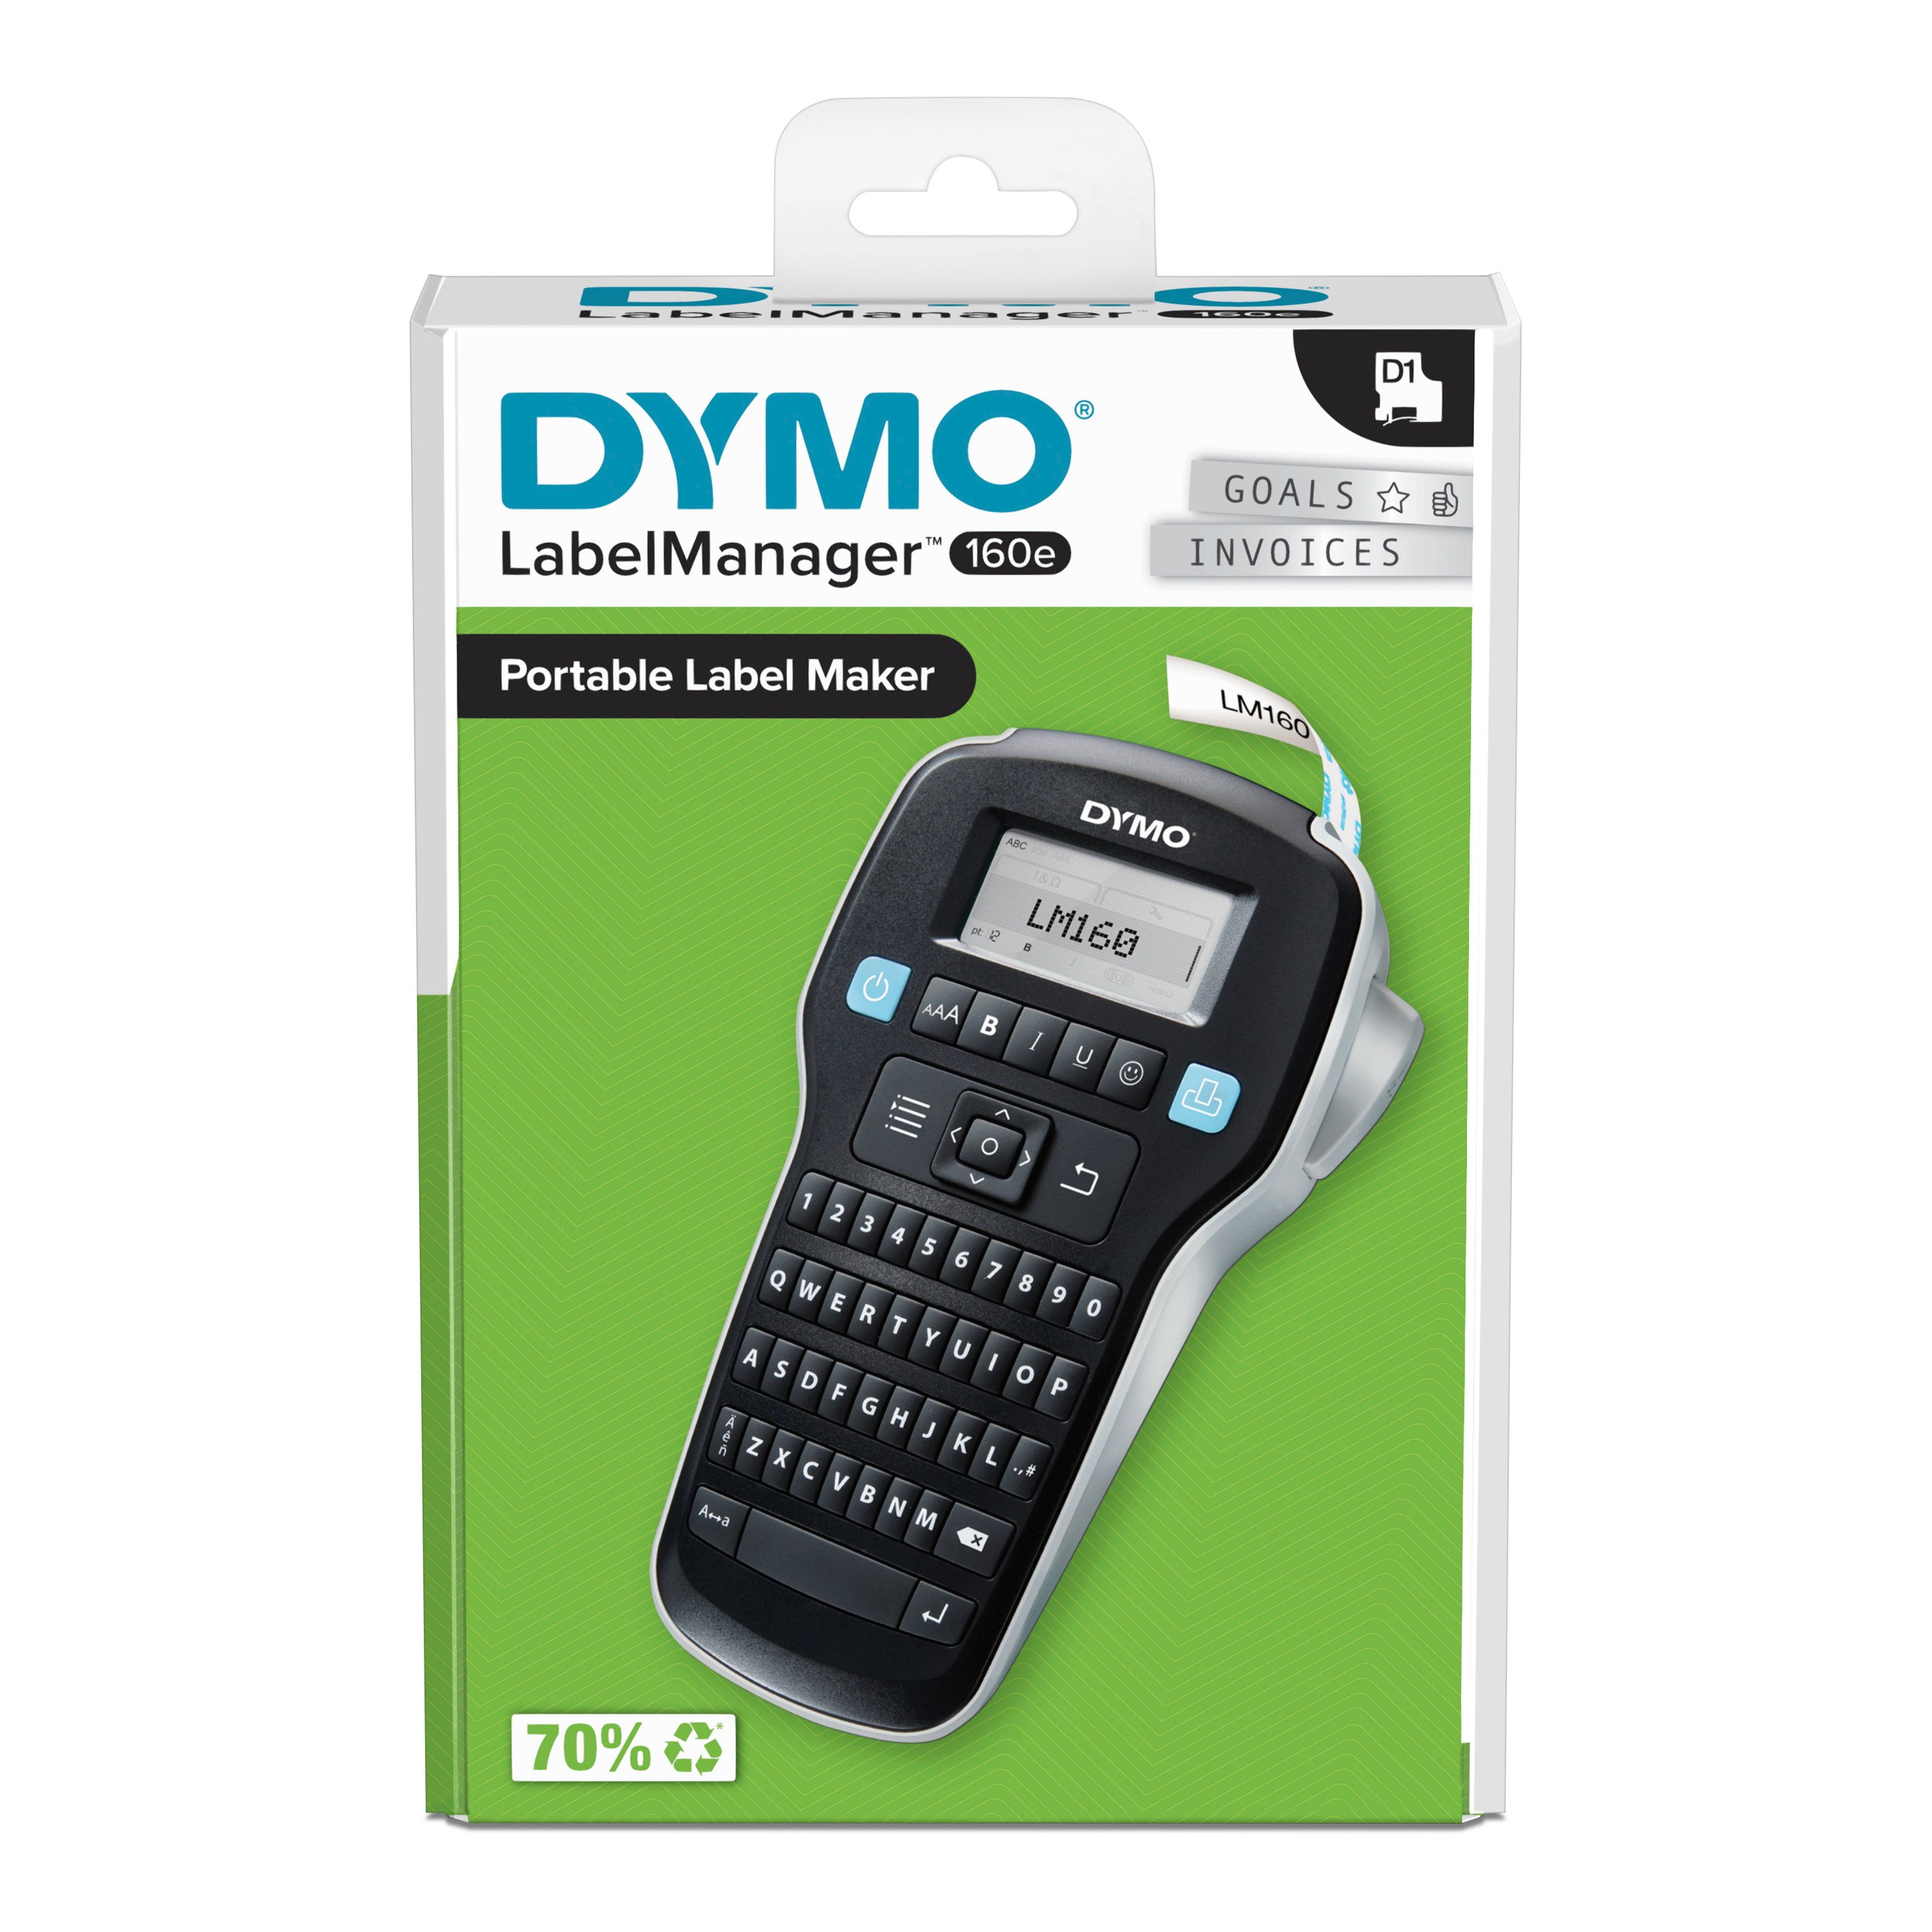 Dymo LabelManager 160 Starter Kit with 3 Rolls D1 Label Tape • Price »